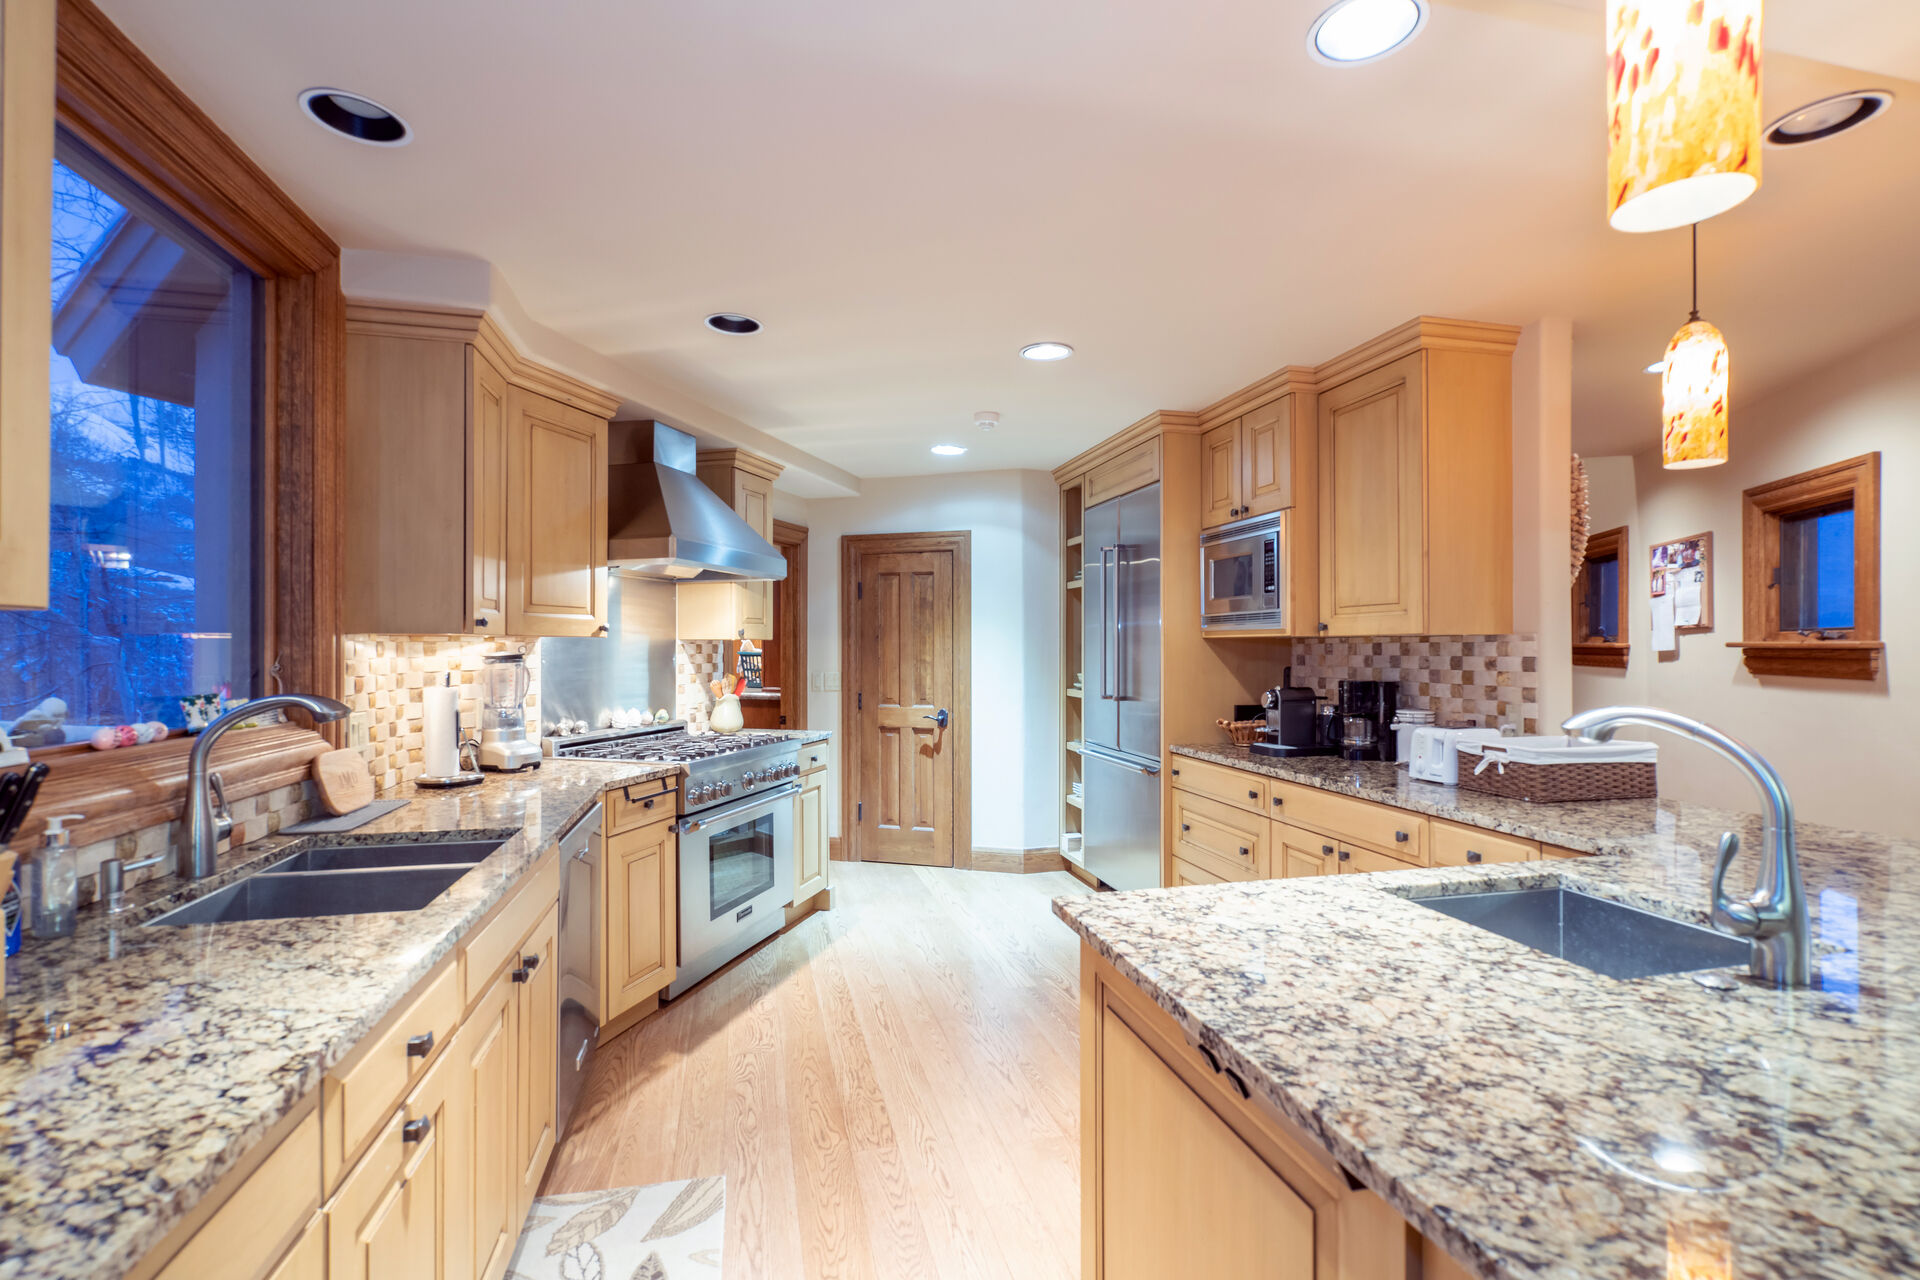 The kitchen of this Telluride golf rental, with two sinks and stainless steel appliances.